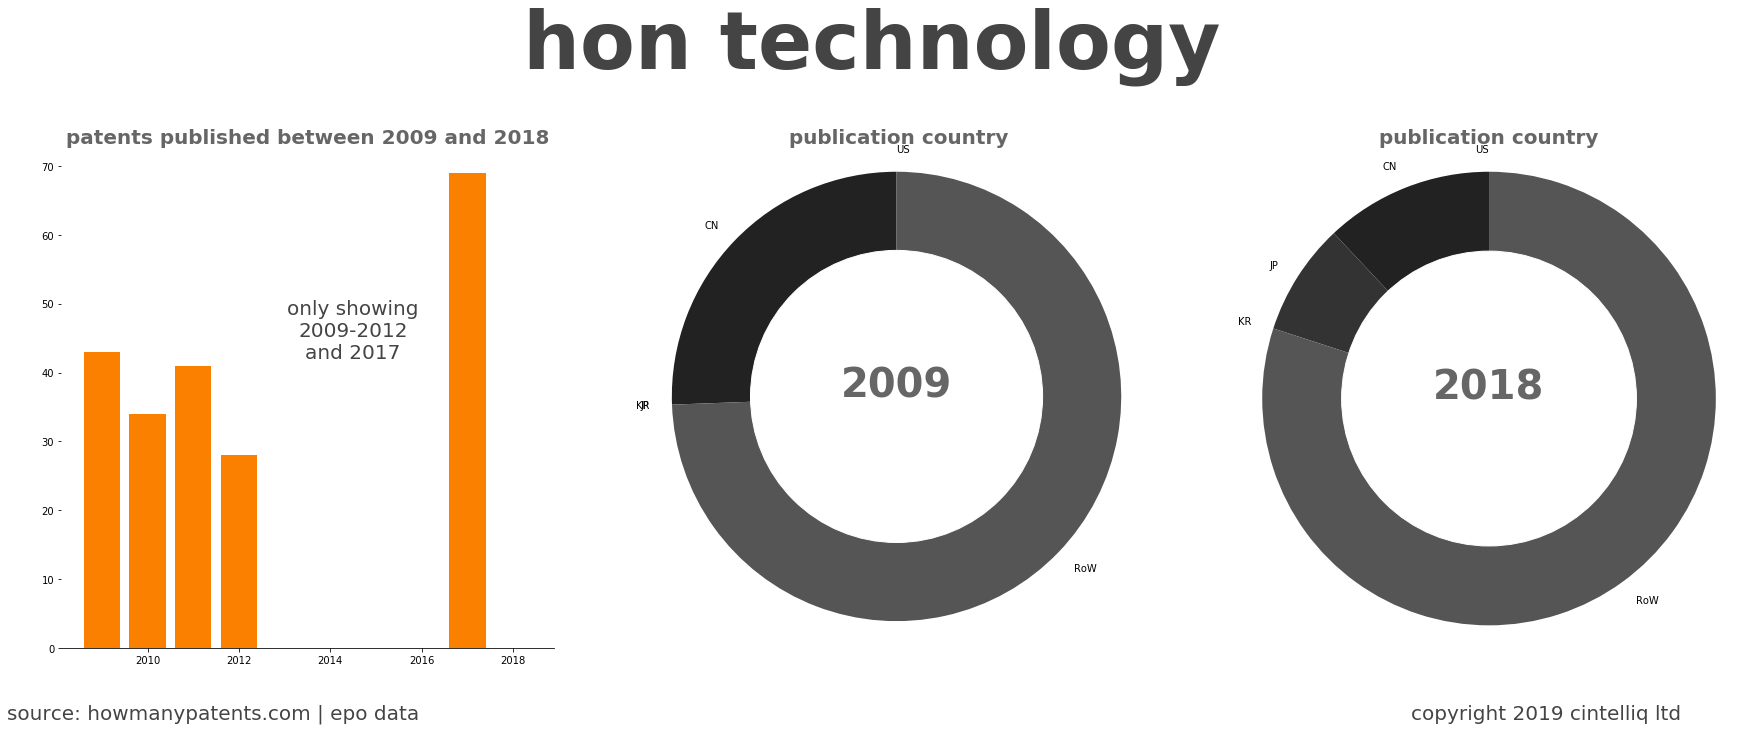 summary of patents for Hon Technology